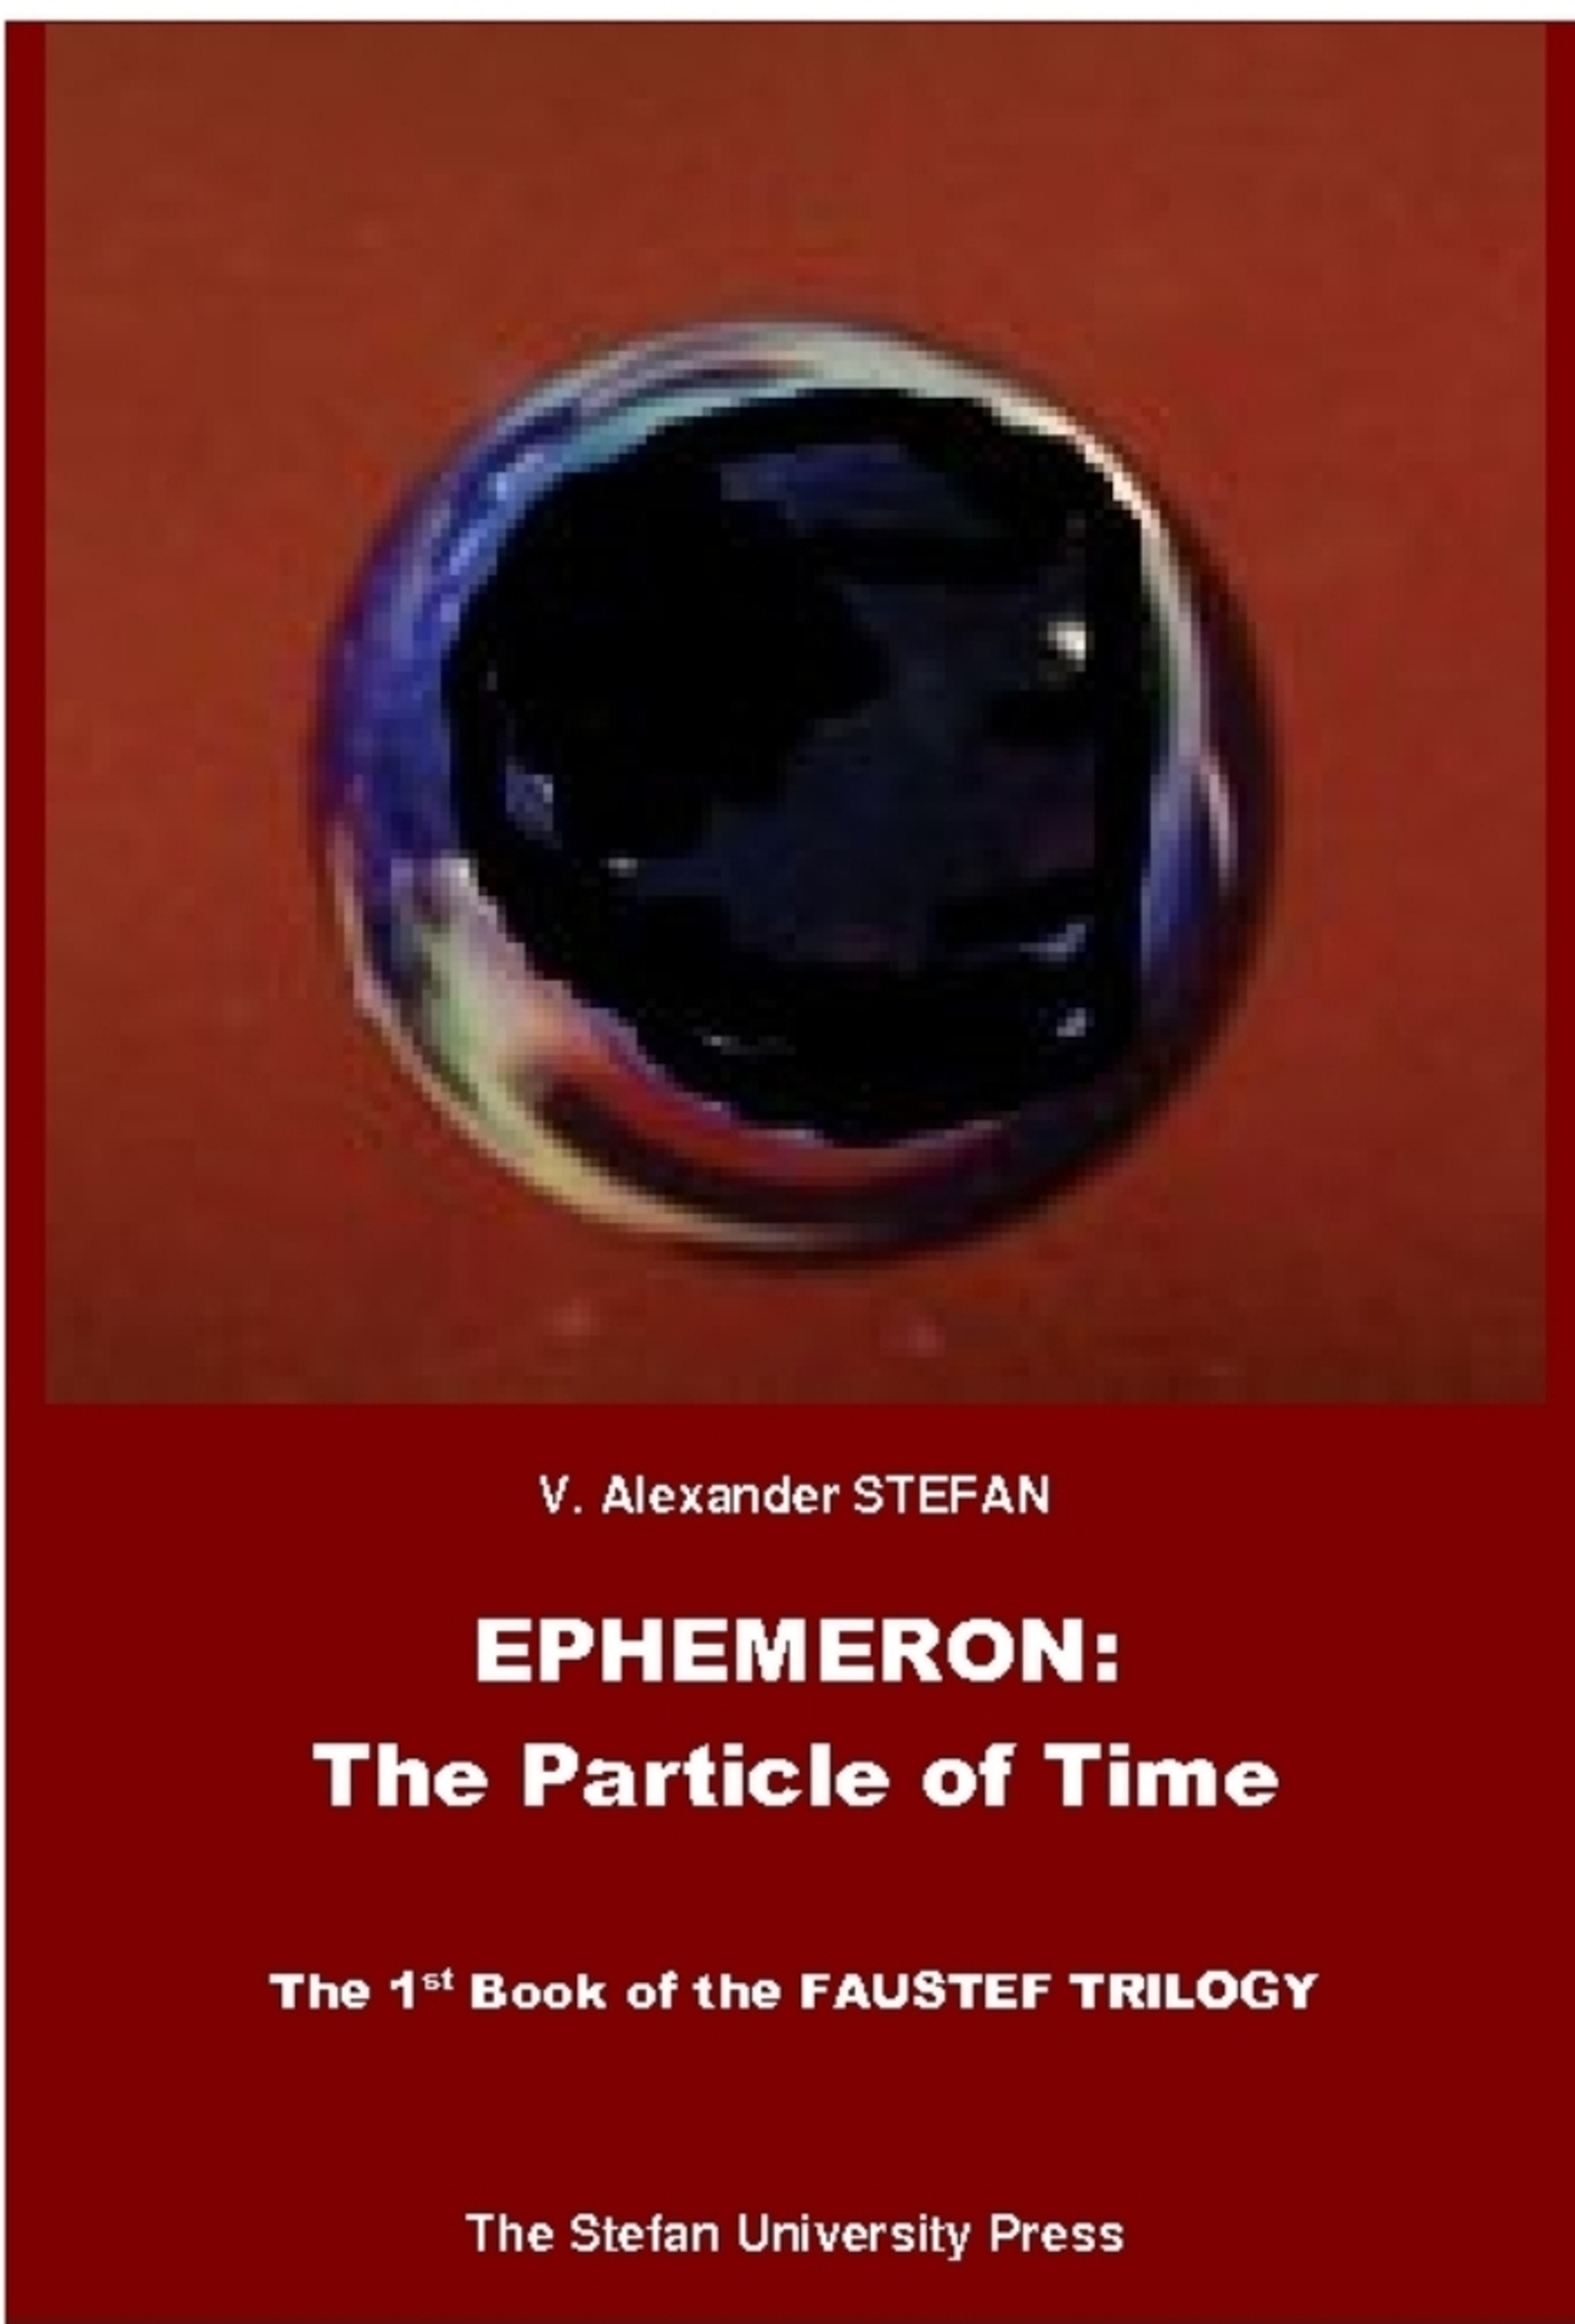 (2002) Book. V. Alexander Stefan, Ephemeron: The Particle of Time (The 1st book of the FAUSTEF TRILOGY)